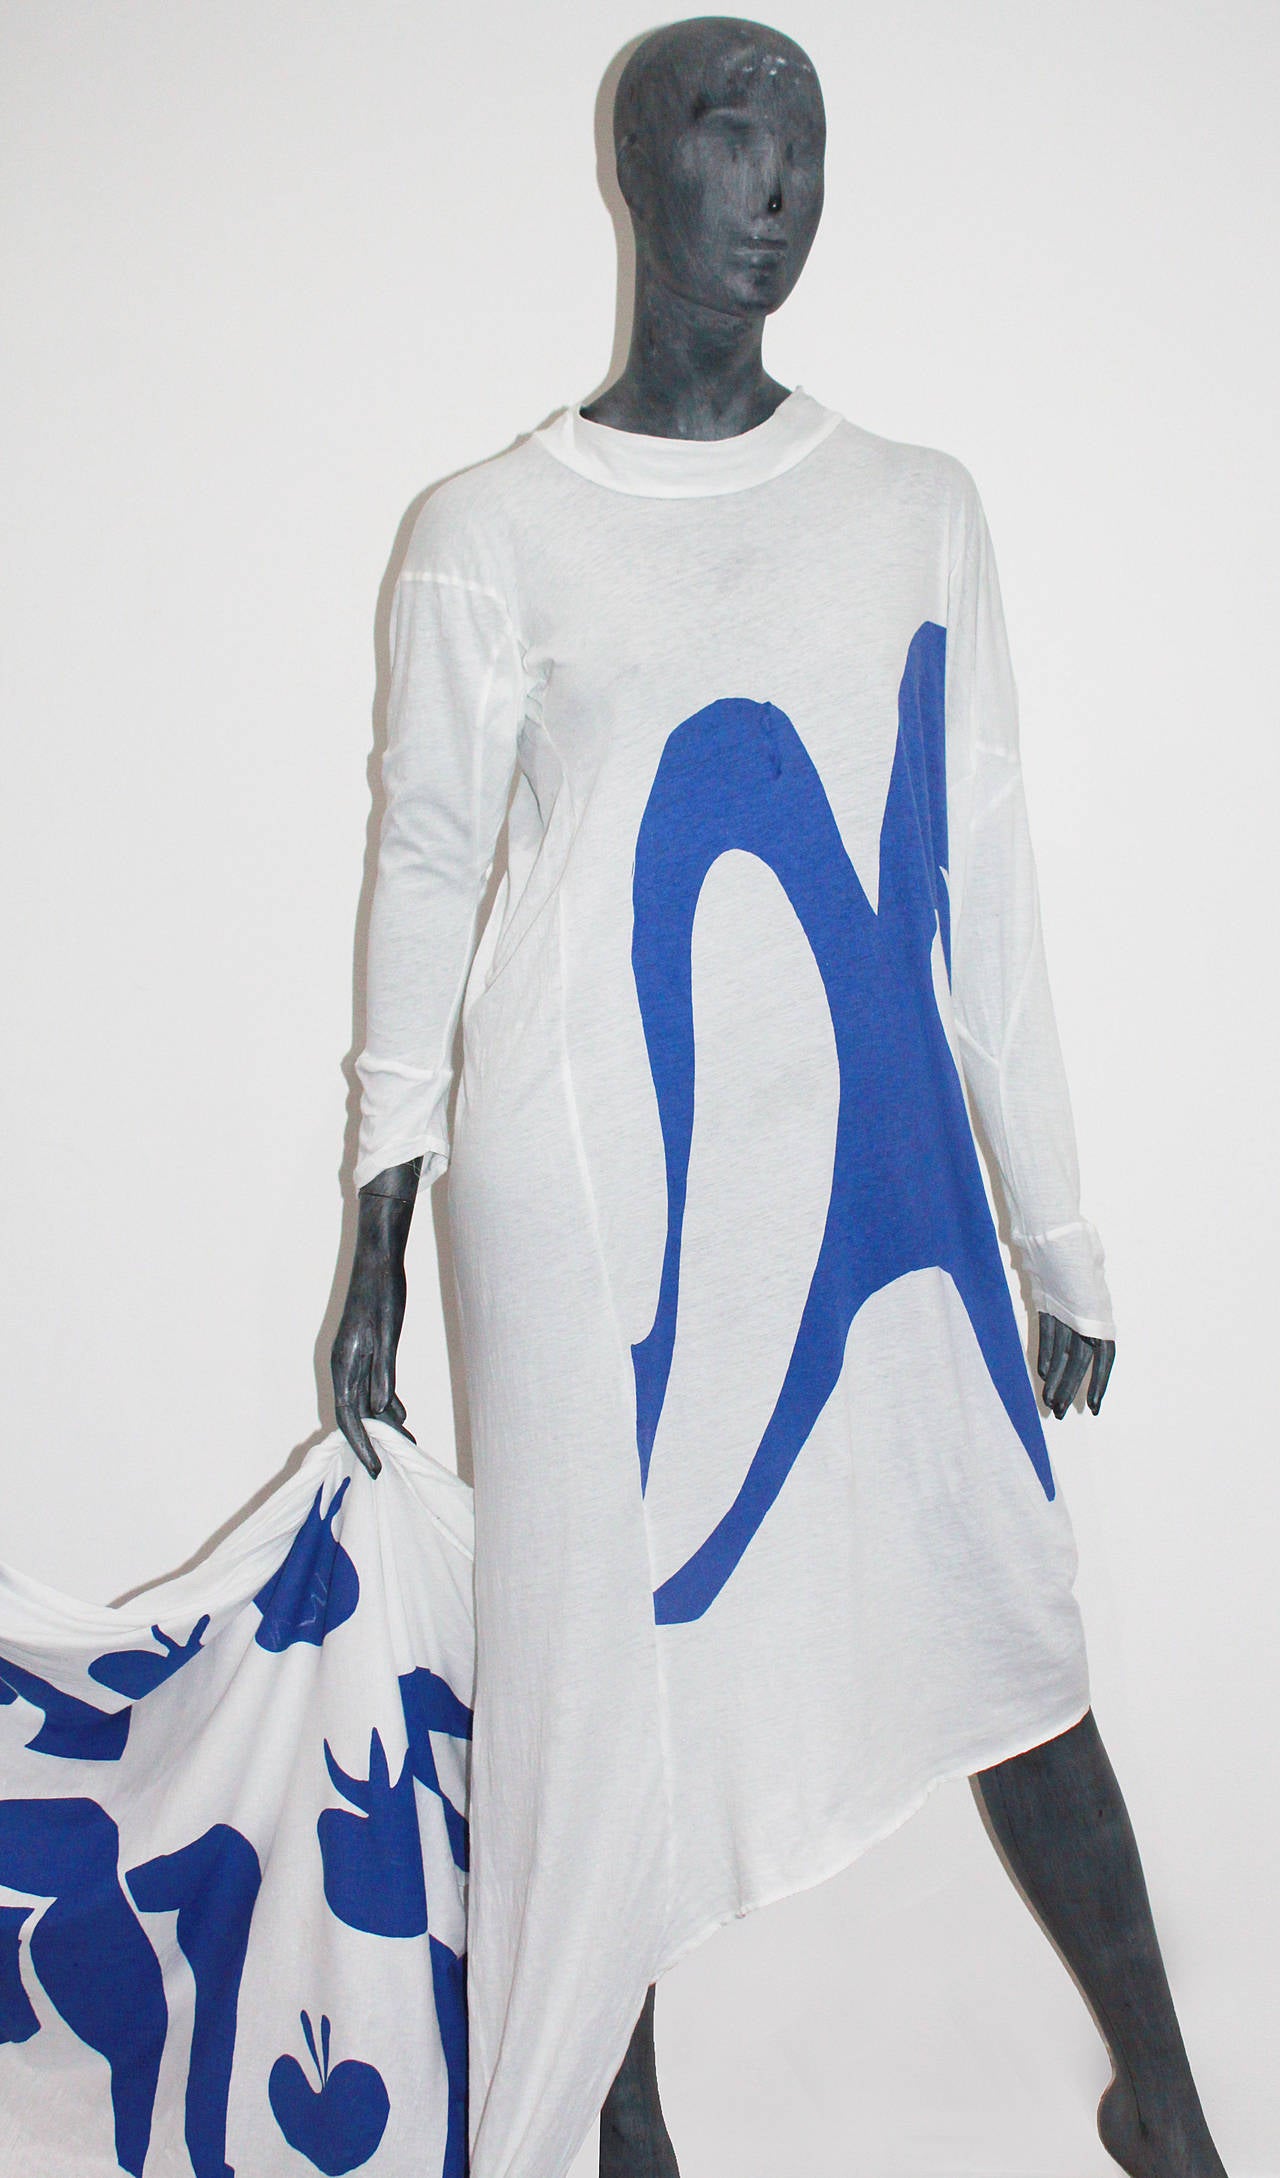 Iconic/Museum Vivienne Westwood Matisse Dress From World's End 1982 at ...